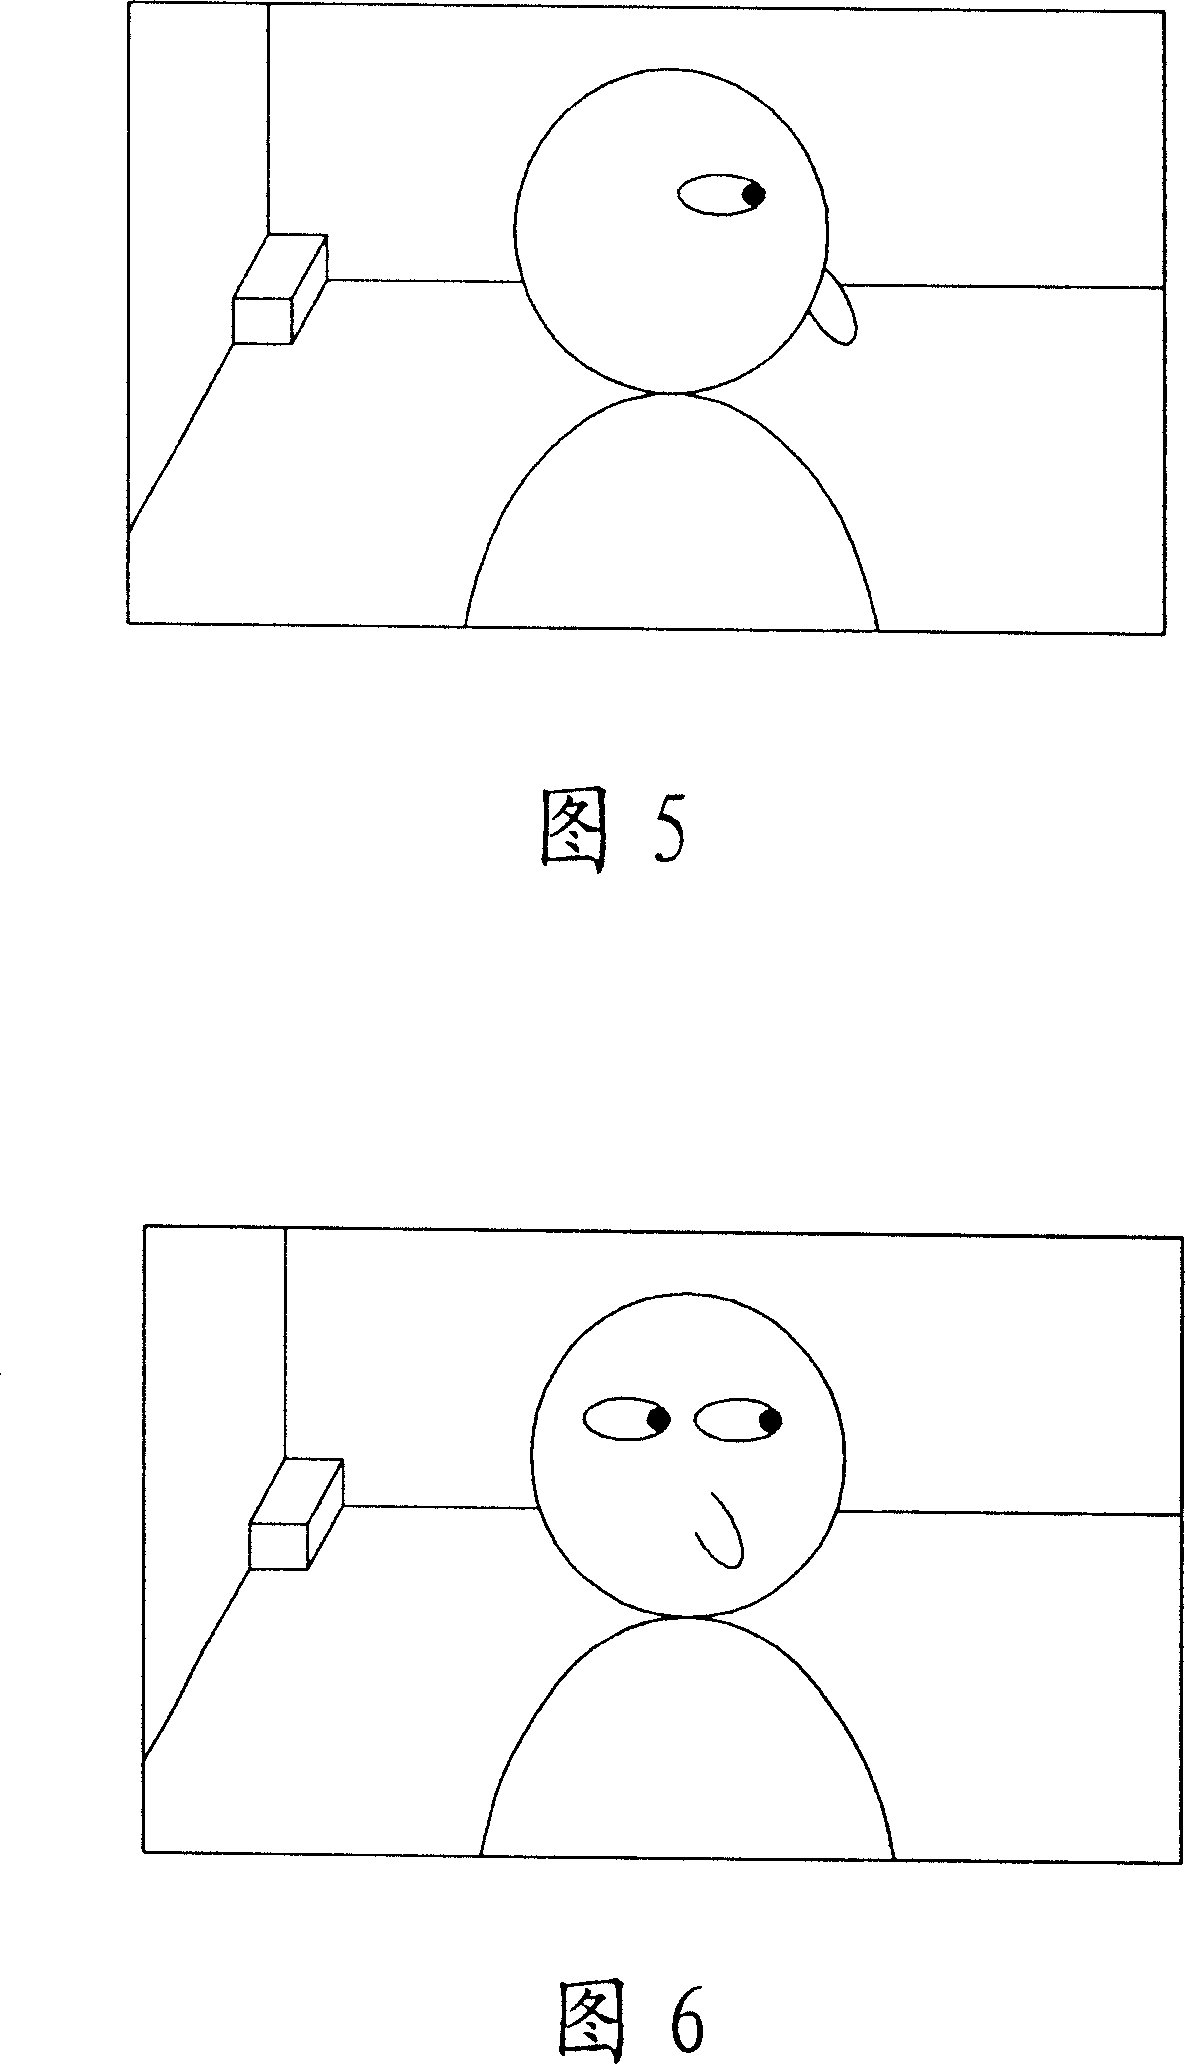 Display system and its control method